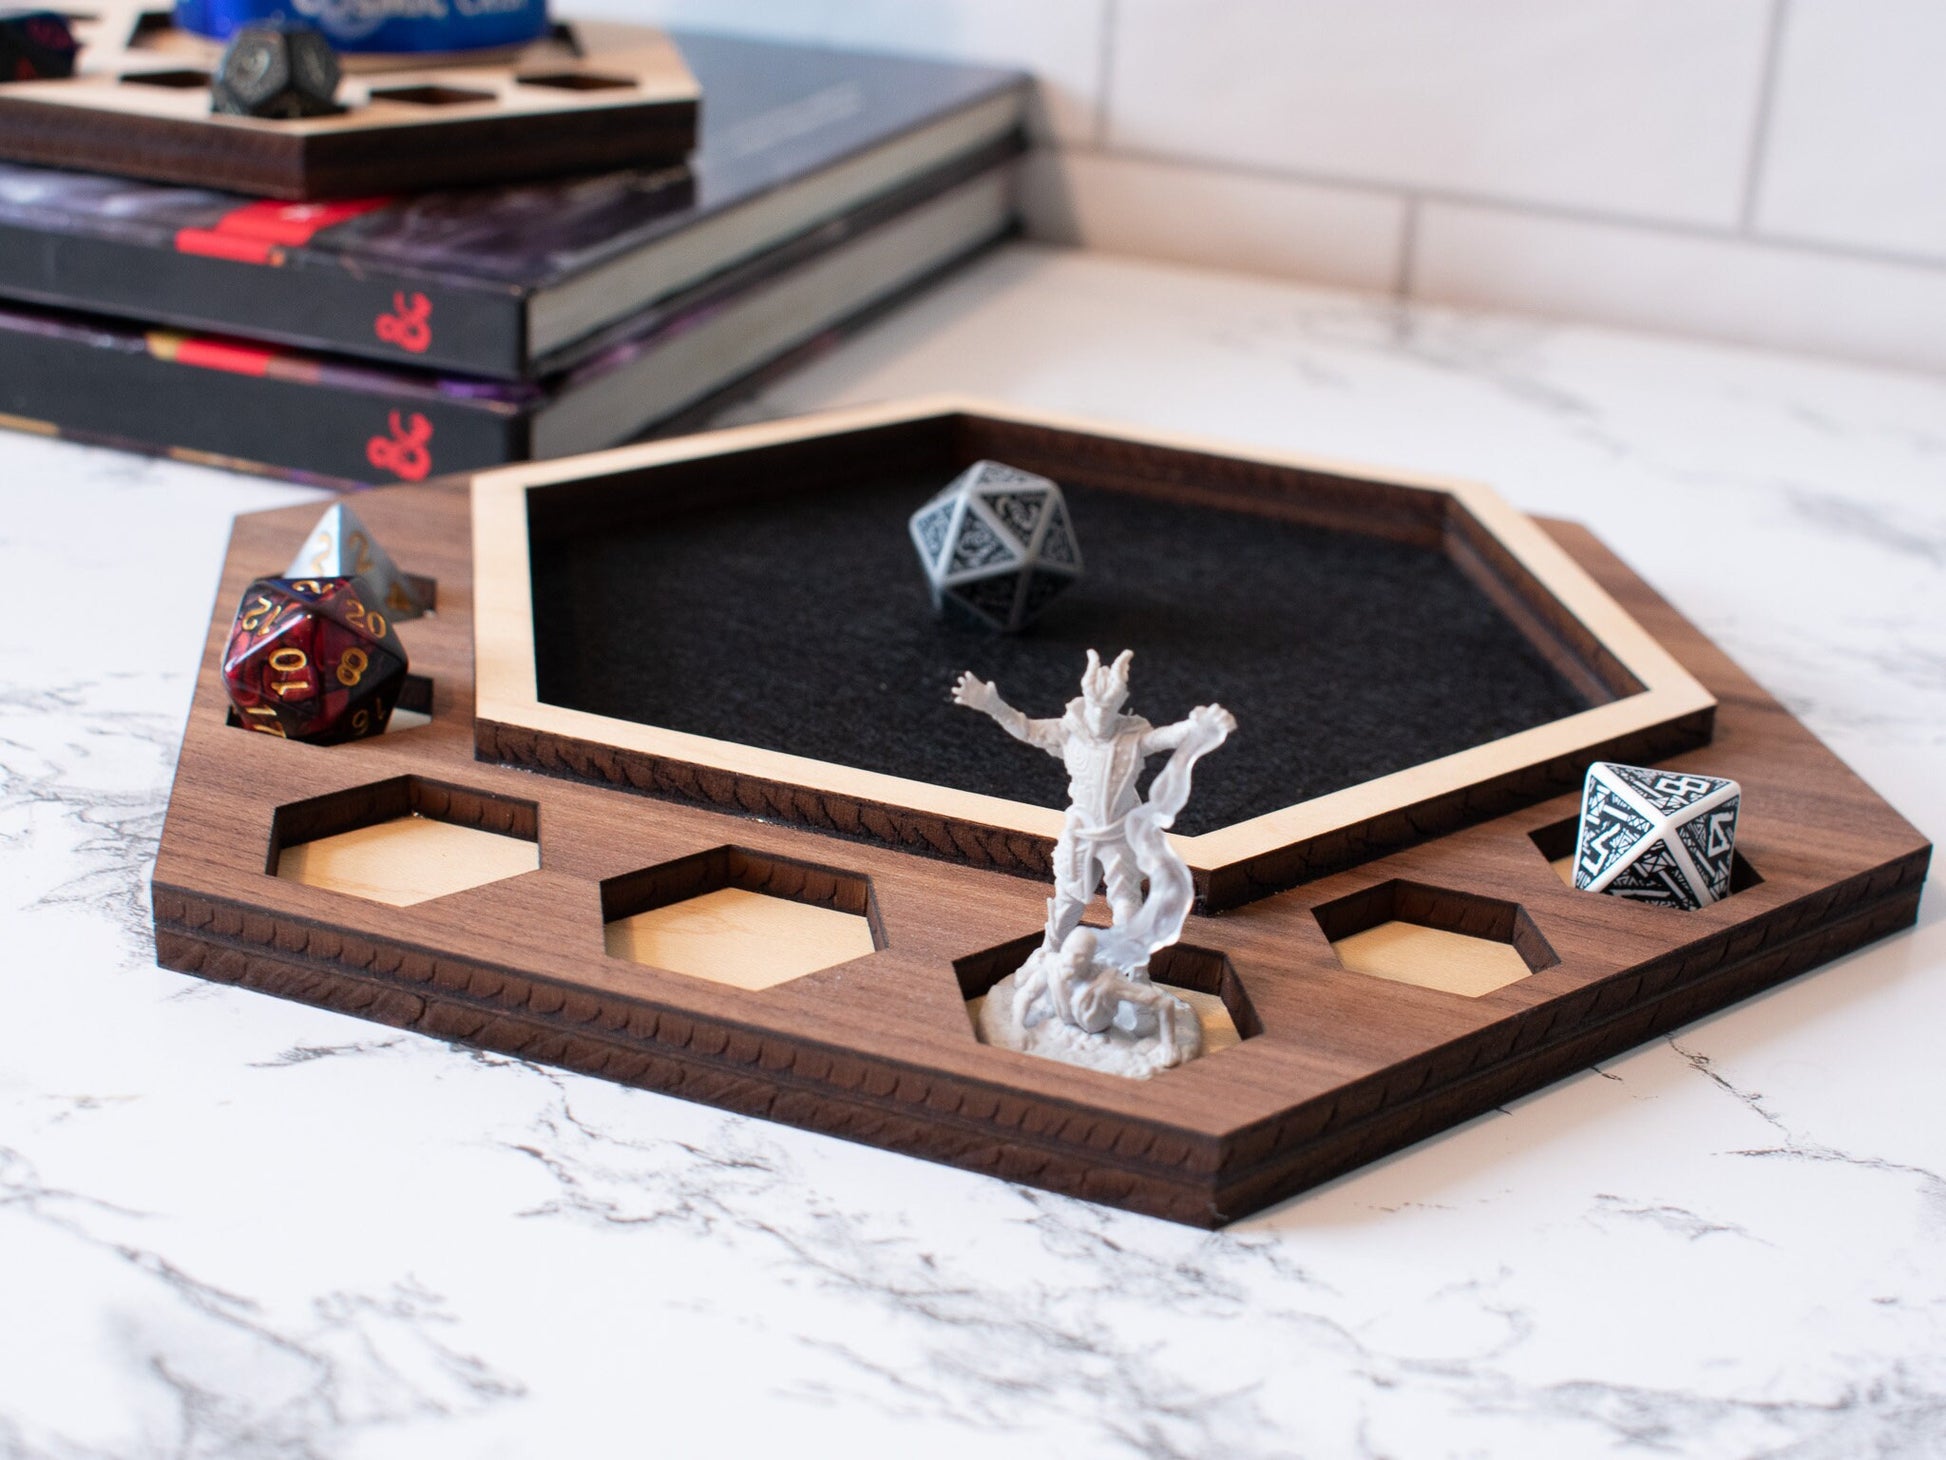 D&D Dice Tray Coaster and Tower Combo, Dungeon Master, DM Gift, Dungeons and Dragons Gift, D20 Dice Storage, DnD Accessory